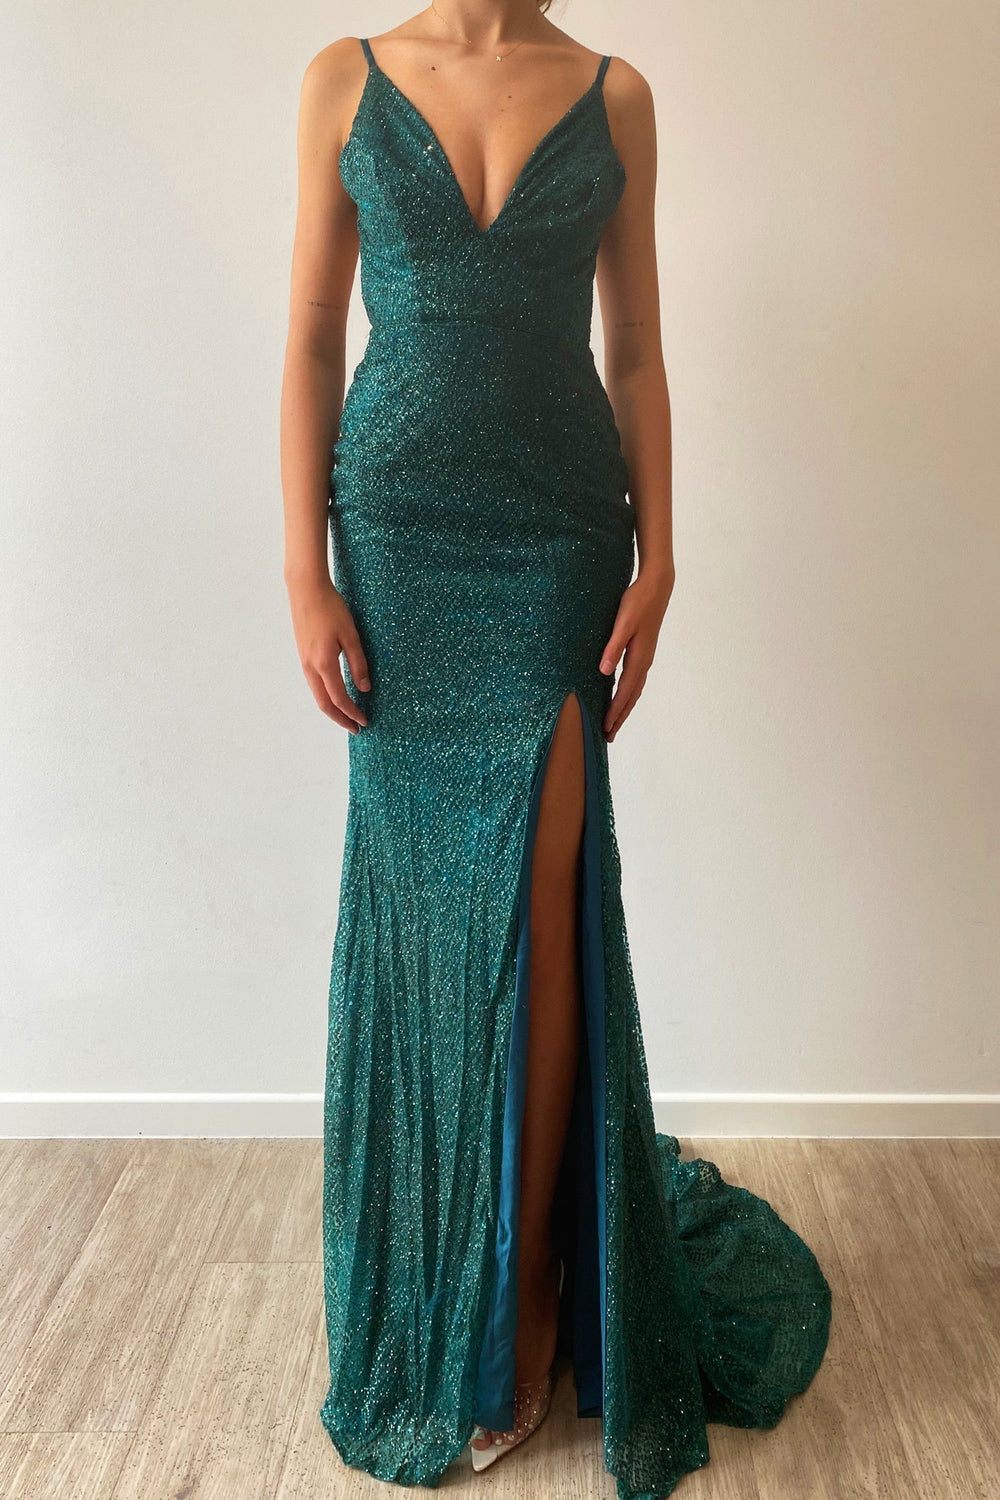 Sample Gown 62 - Emerald Glitter Gown with Side Slit